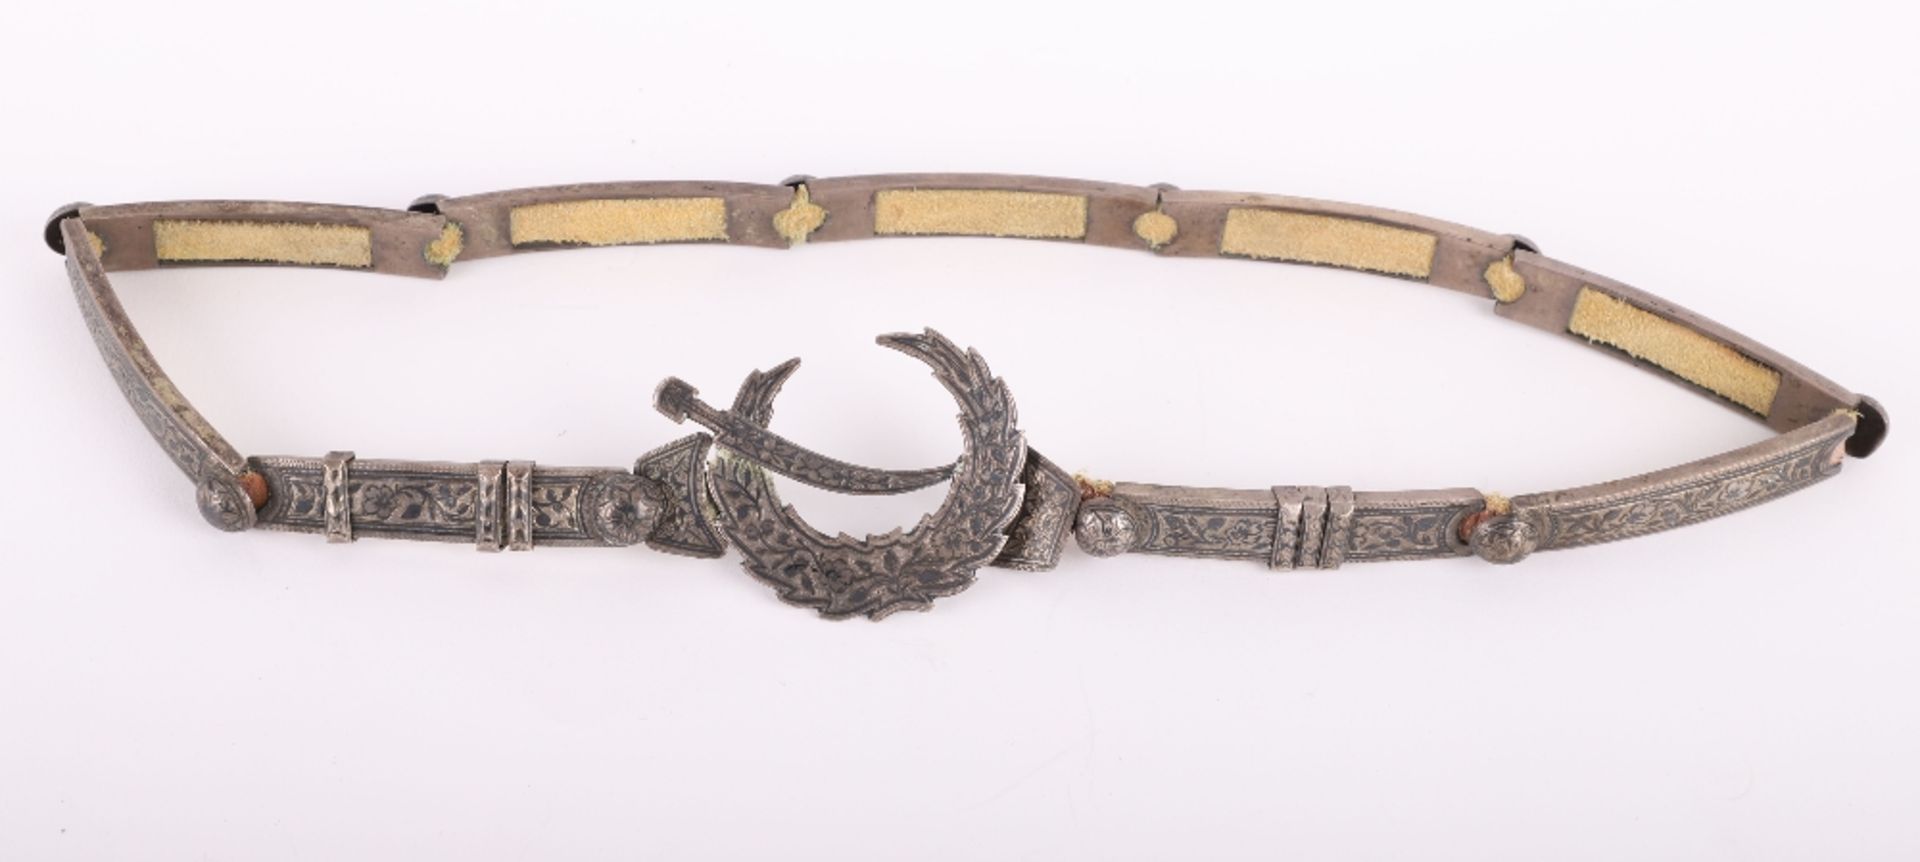 Fine Quality Late 19th Century / Early 20th Century Russian Kinjal Belt - Image 2 of 8